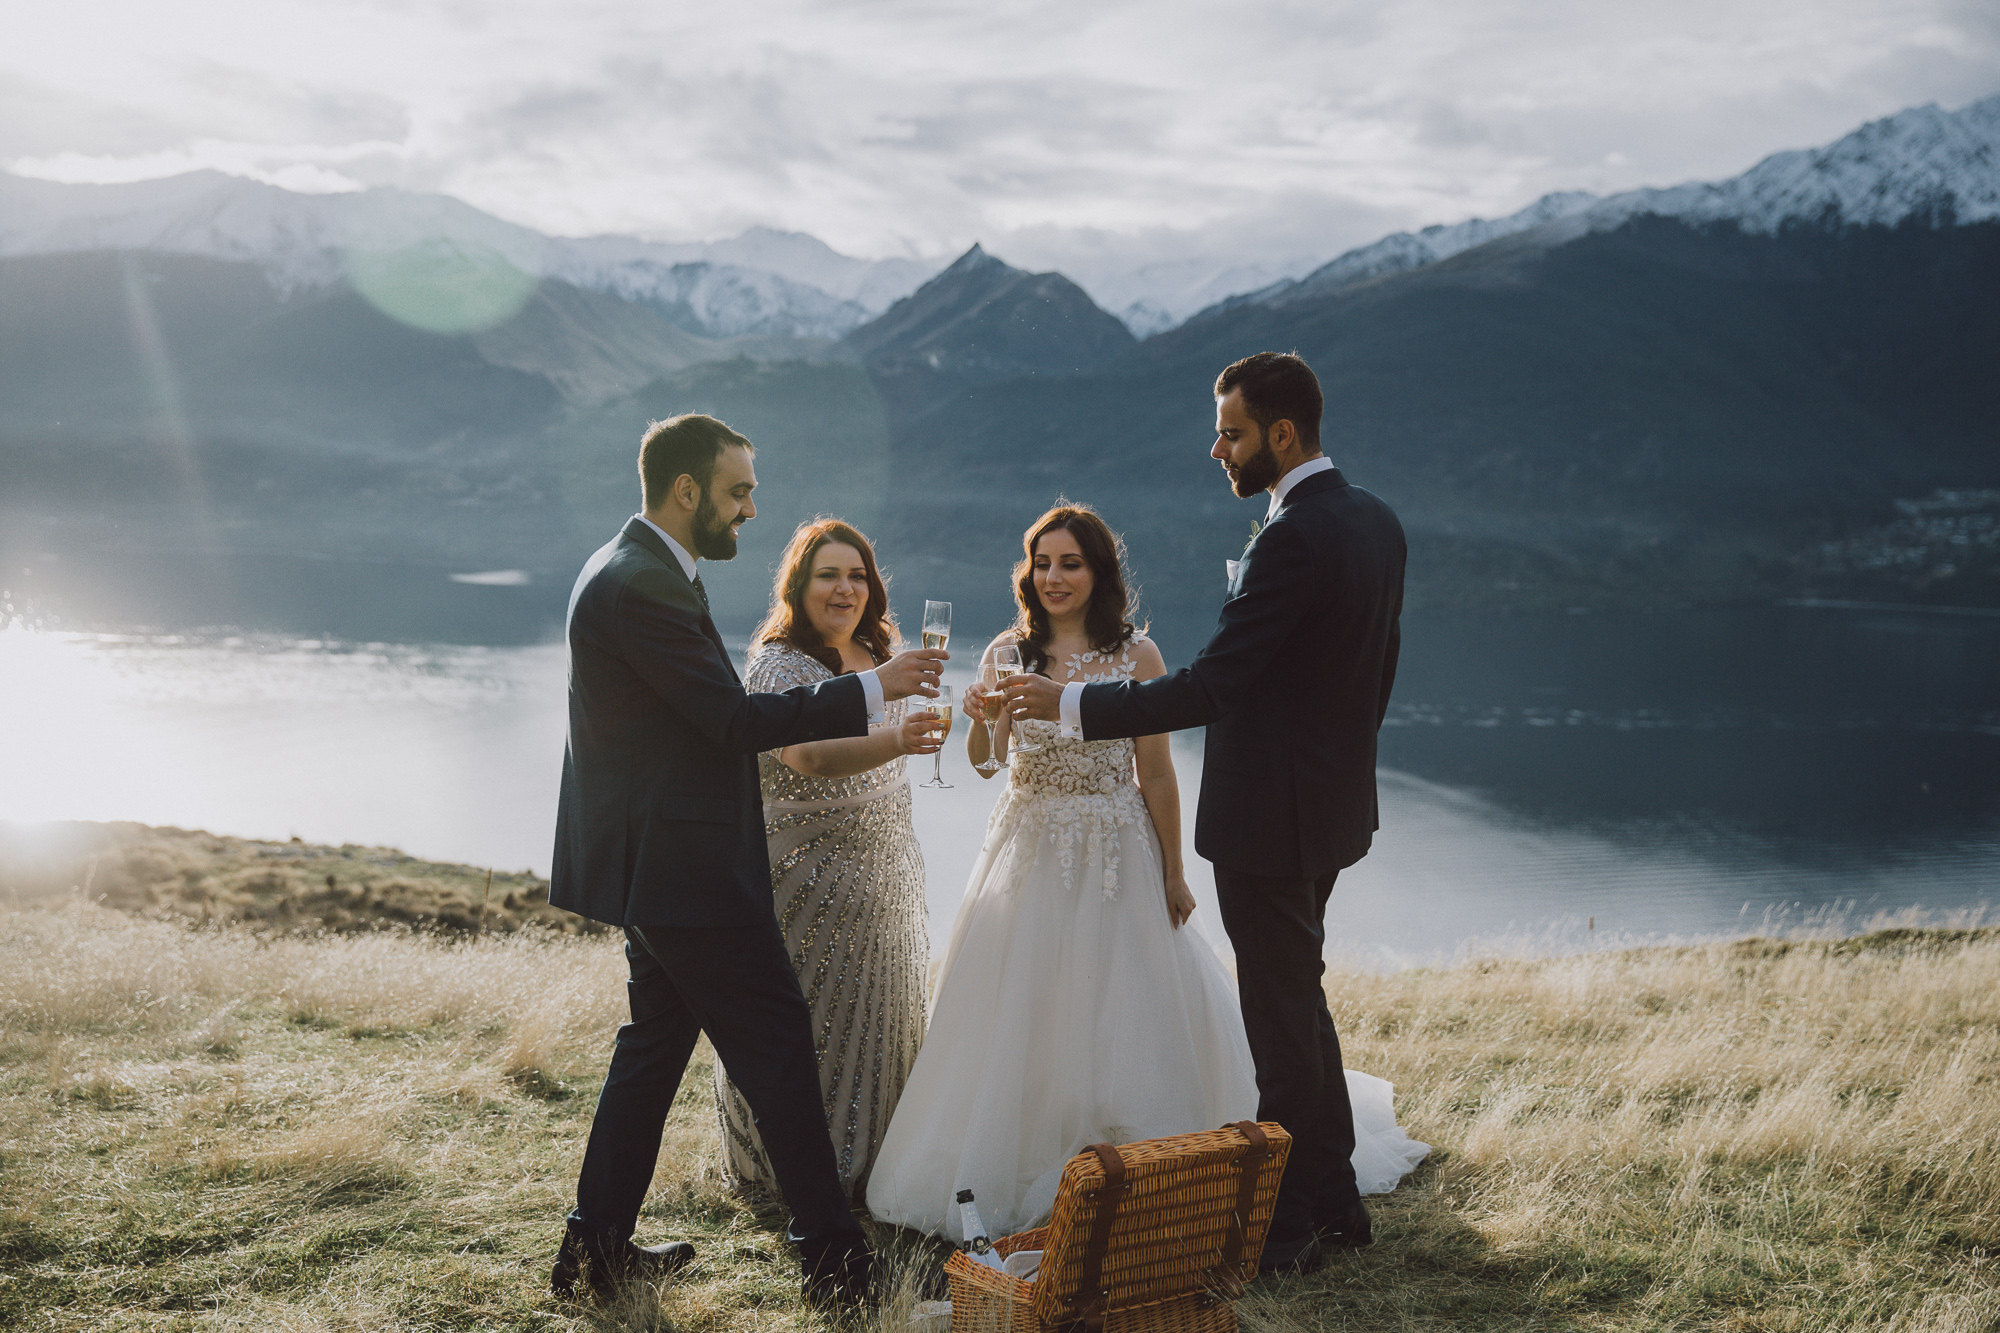 Queenstown Heli Wedding Planning for Mountaintop Photos at Cecil Peak